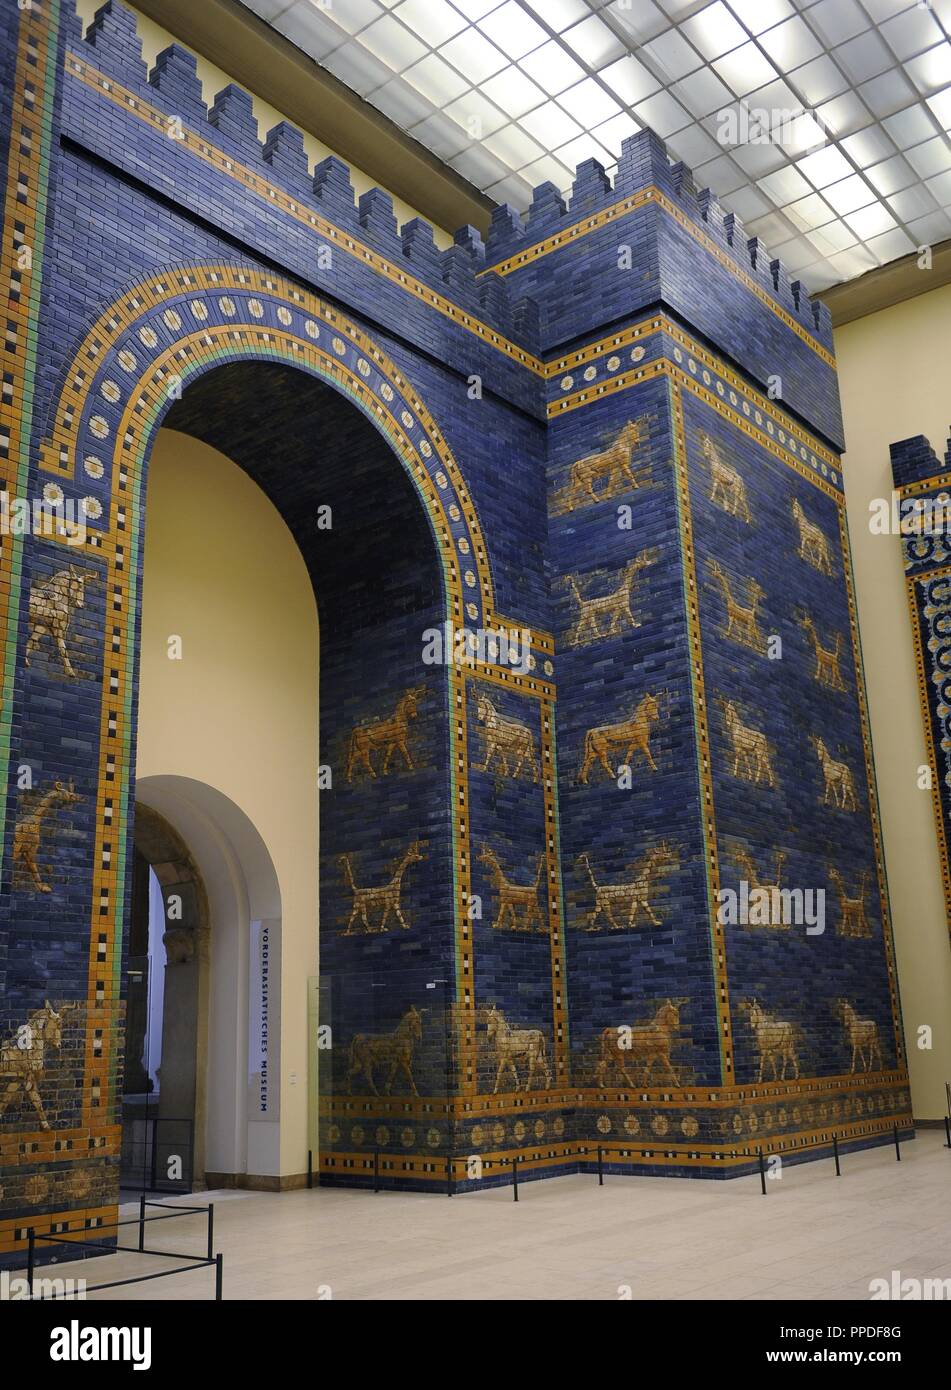 Mesopotamian art. Neo-Babylonian. Ishtar Gate, one of the eight gates of the inner wall of Babylon. Built in the year 575 B.C. during the reign of Nebuchadnezzar II (604-562 BC) using glazed blue brick with alternating rows of basrelief with dragons mushussu, also called sirrush, and aurochs. It was dedicated to the Babylonian goddess Ishtar. Rebuilt in 1930. Pergamon Museum. Berlin. Germany. Stock Photo